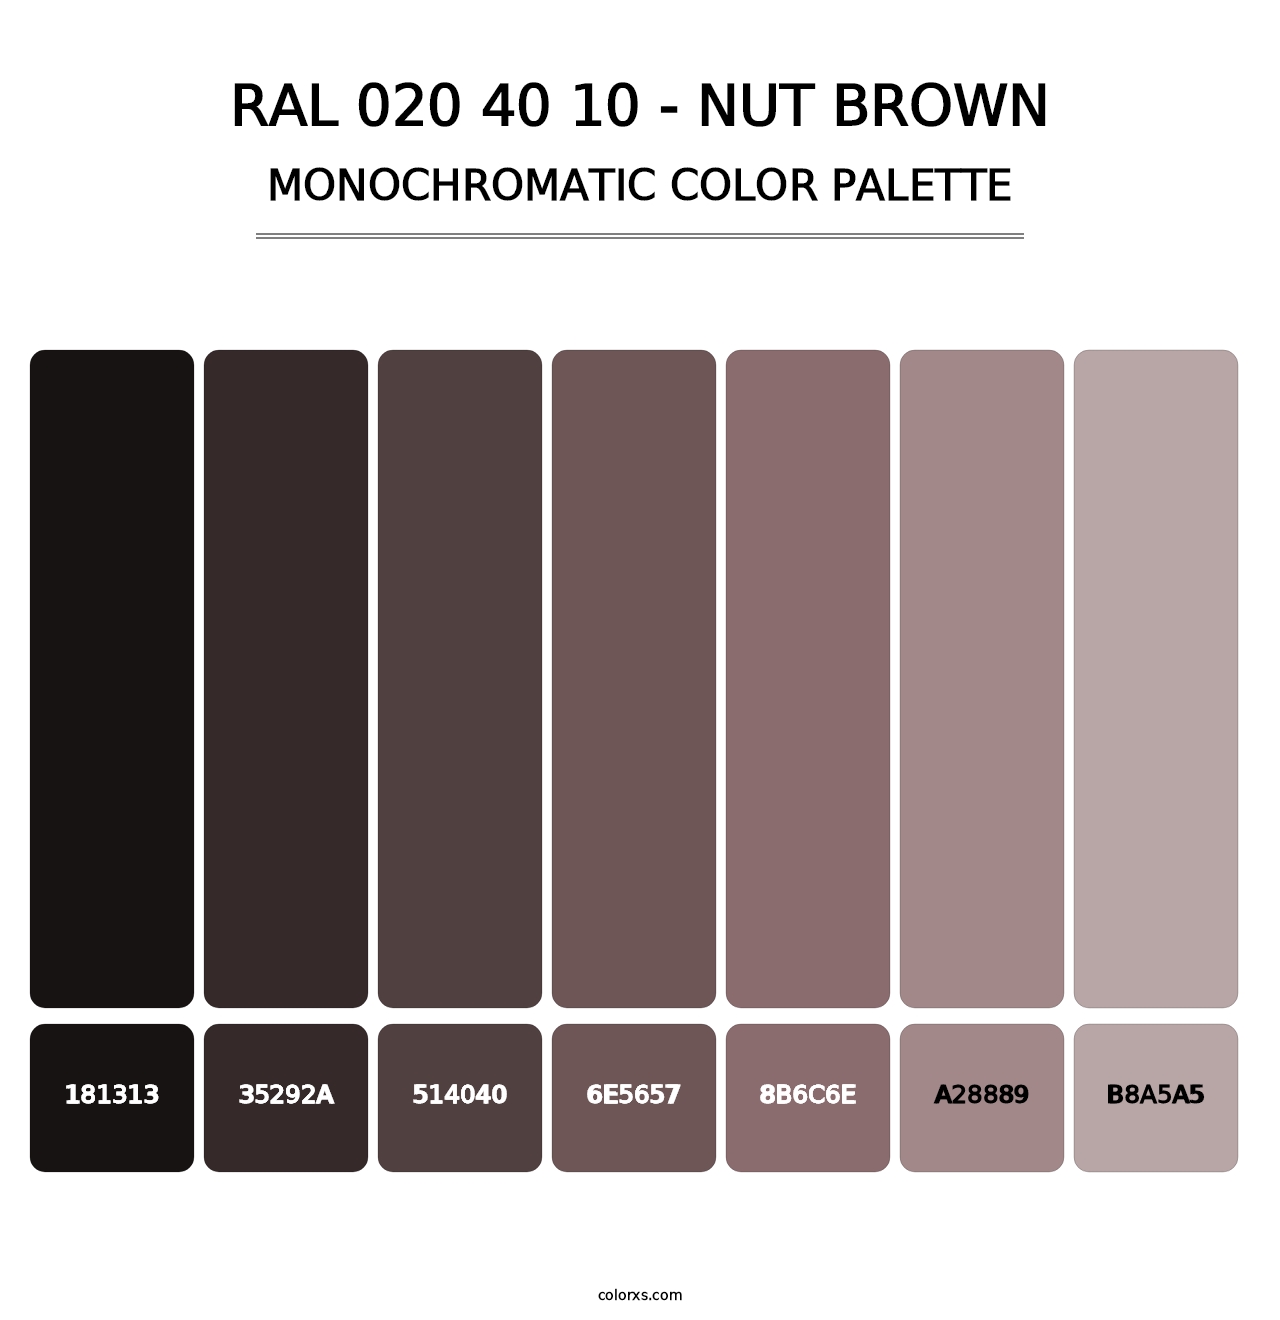 RAL 020 40 10 - Nut Brown - Monochromatic Color Palette